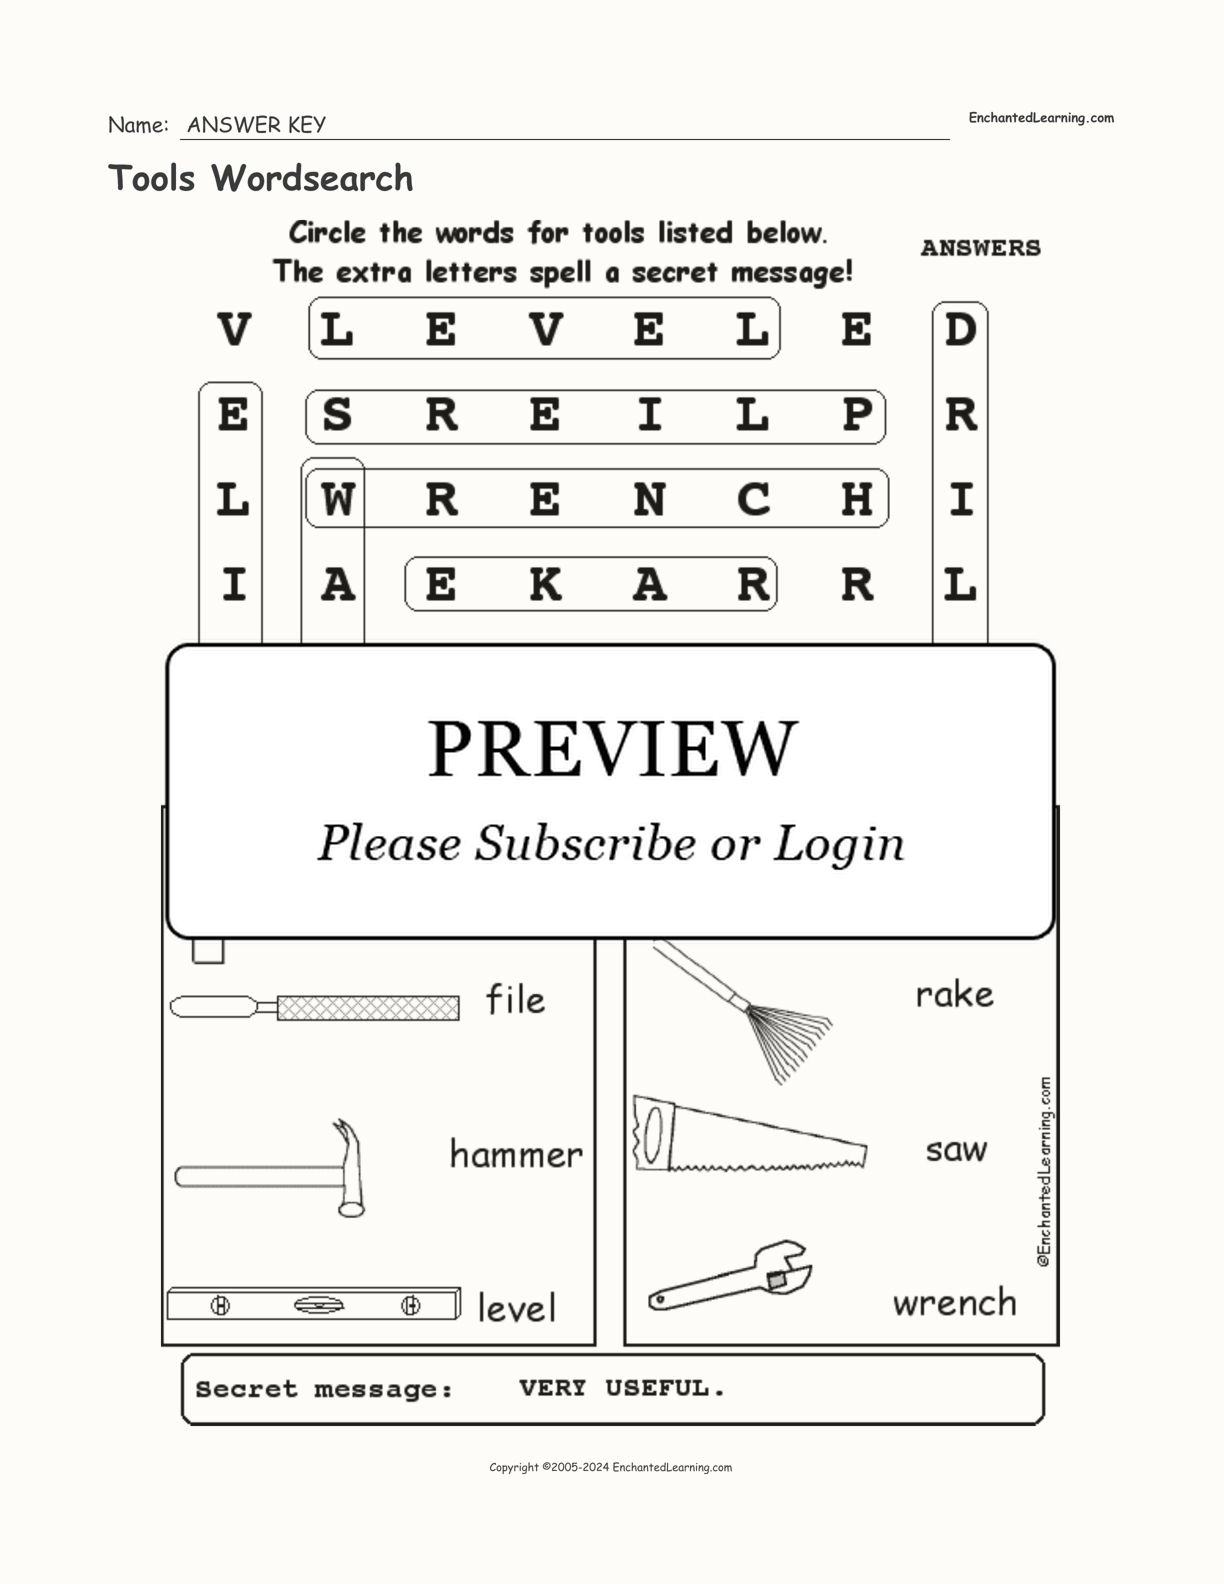 Tools Wordsearch interactive worksheet page 2